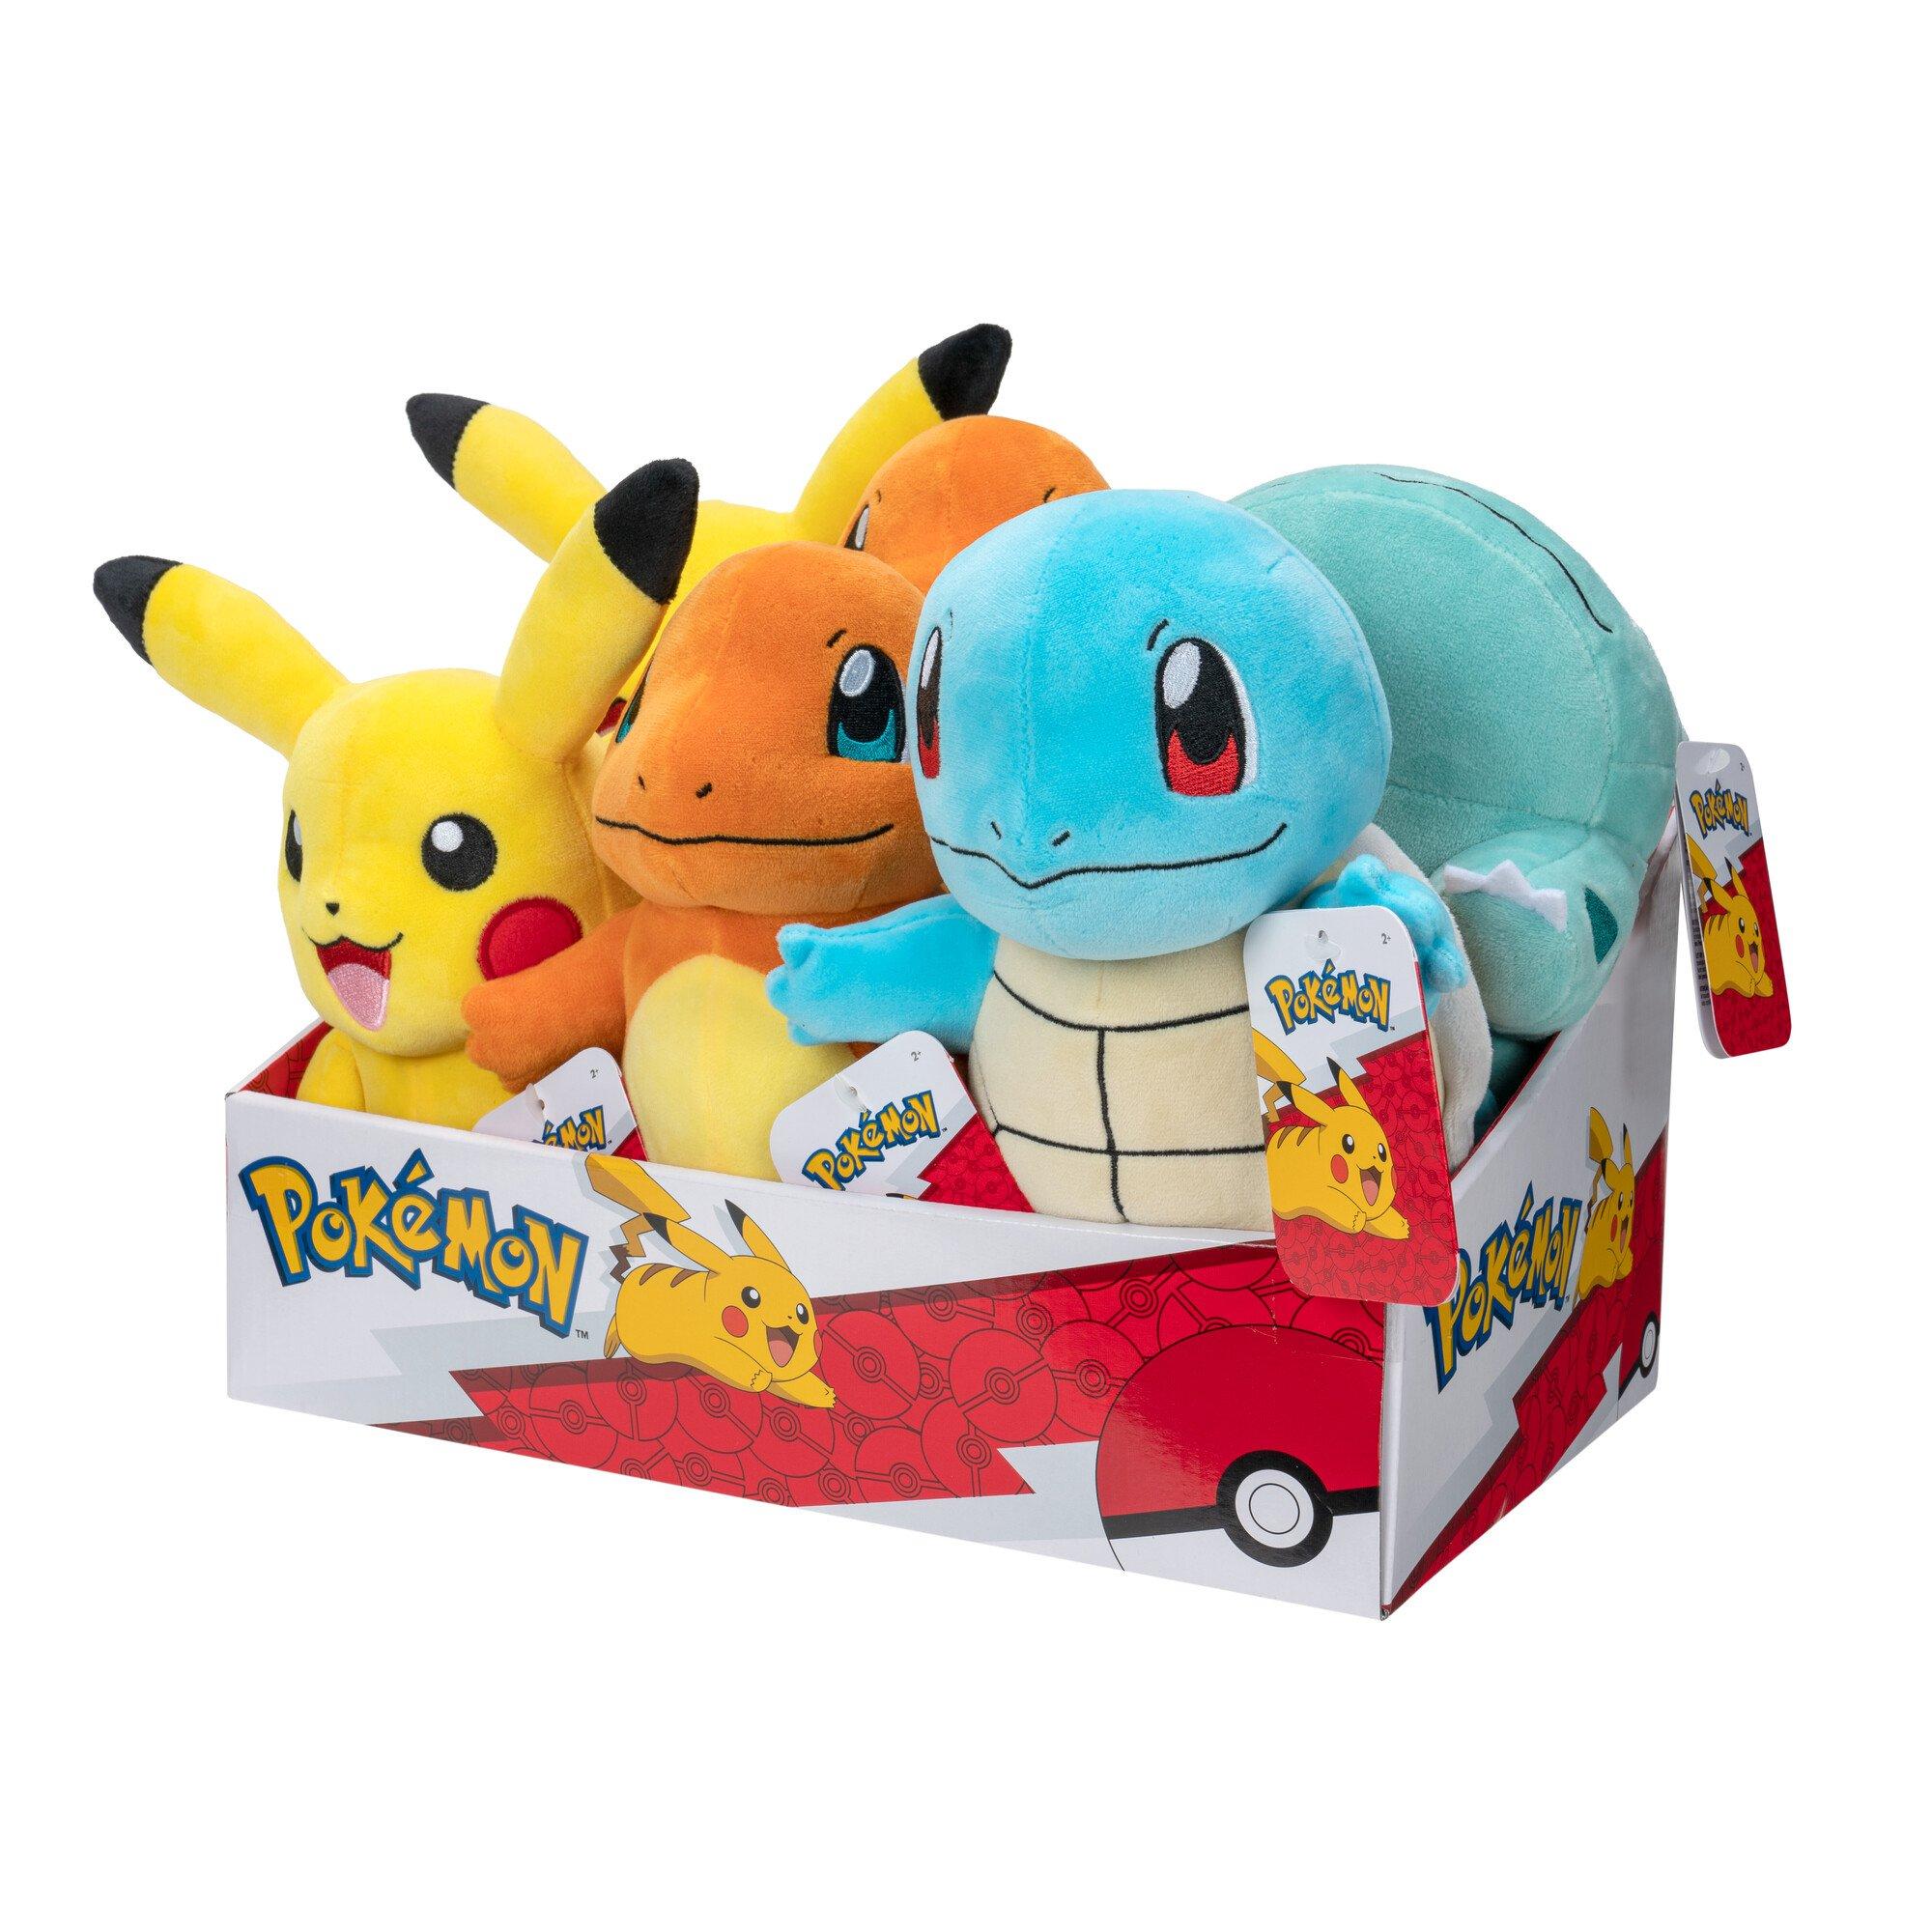 Gotta collect them all! Over 150 Pokemon plush toys coming to